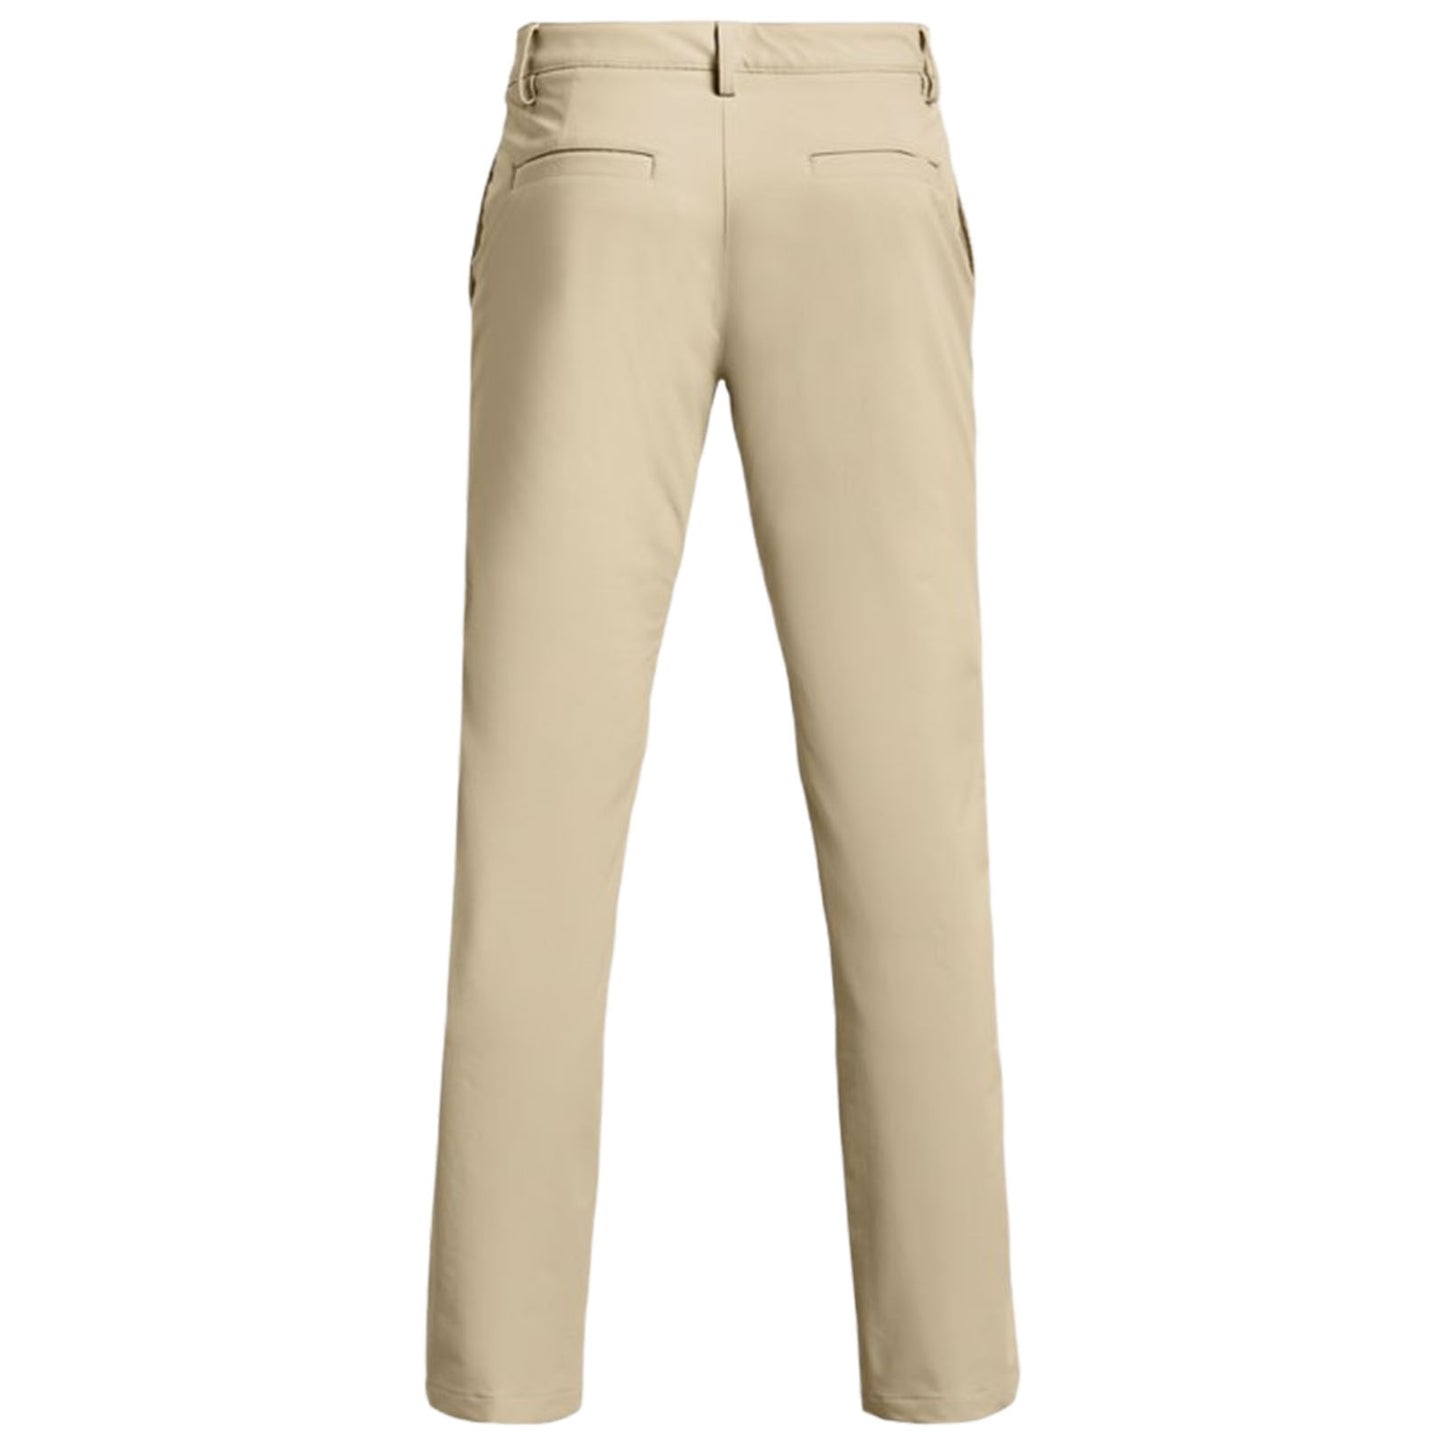 Under Armour Mens Matchplay Trousers